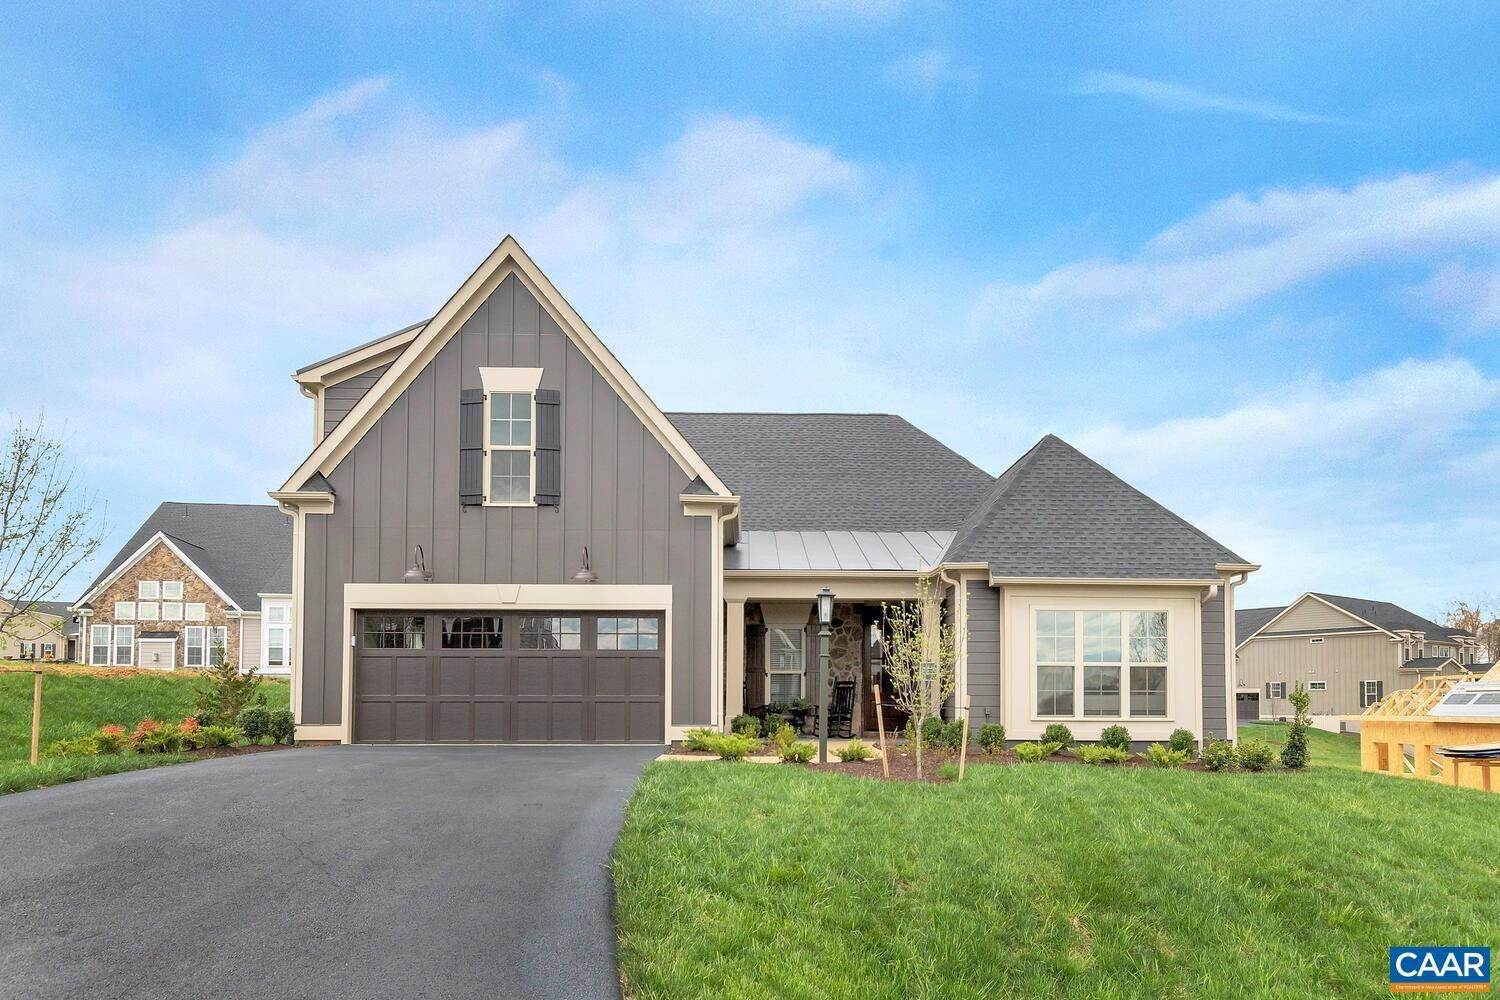 2. Single Family Homes for Sale at 31C ROWCROSS ST #Lot 1 Crozet, Virginia 22932 United States